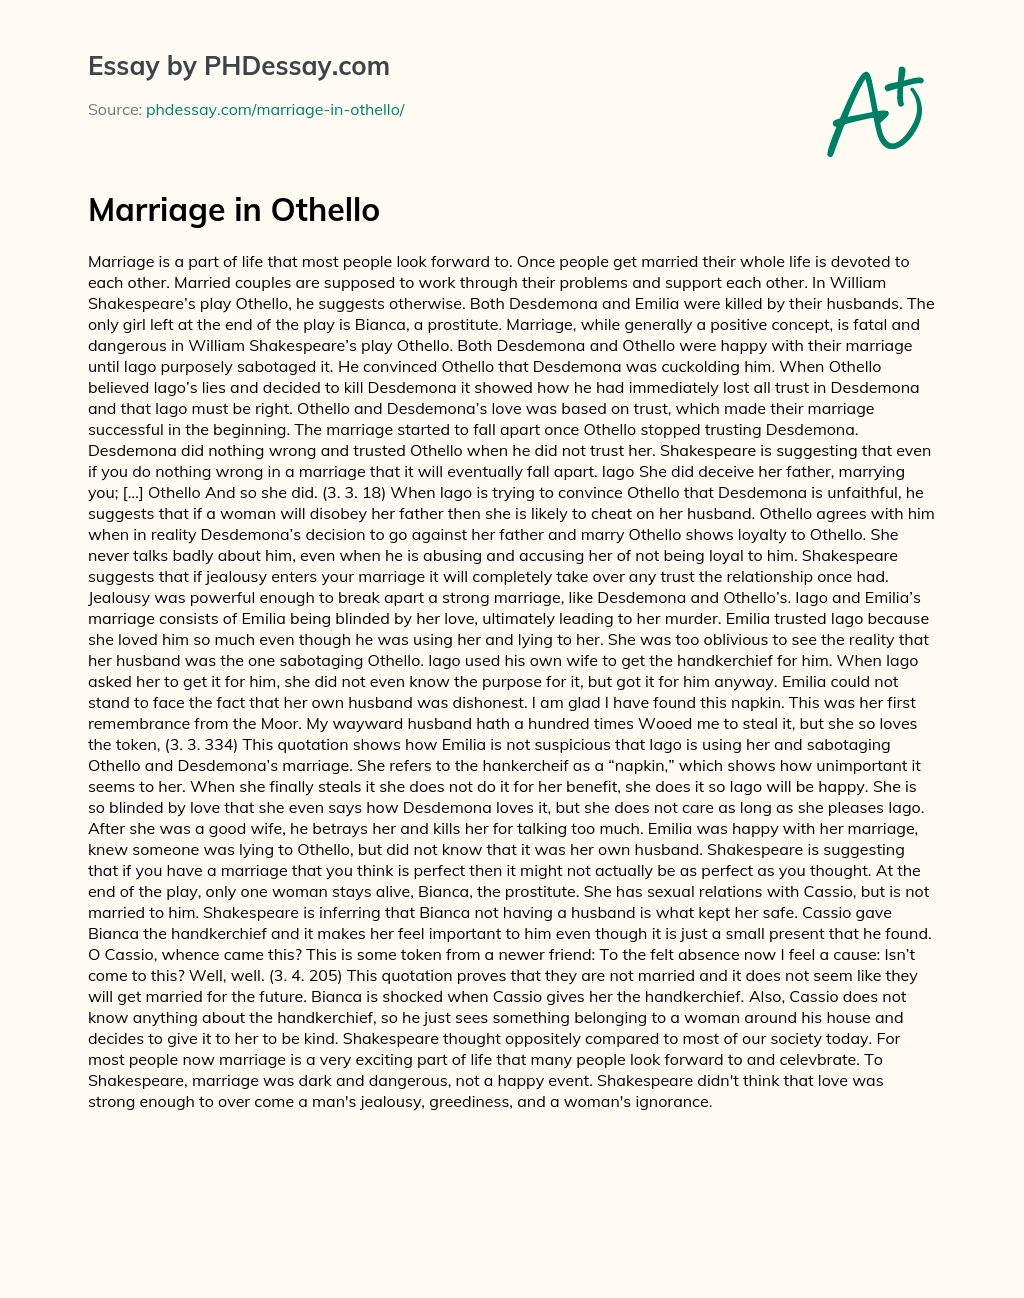 Marriage in Othello essay